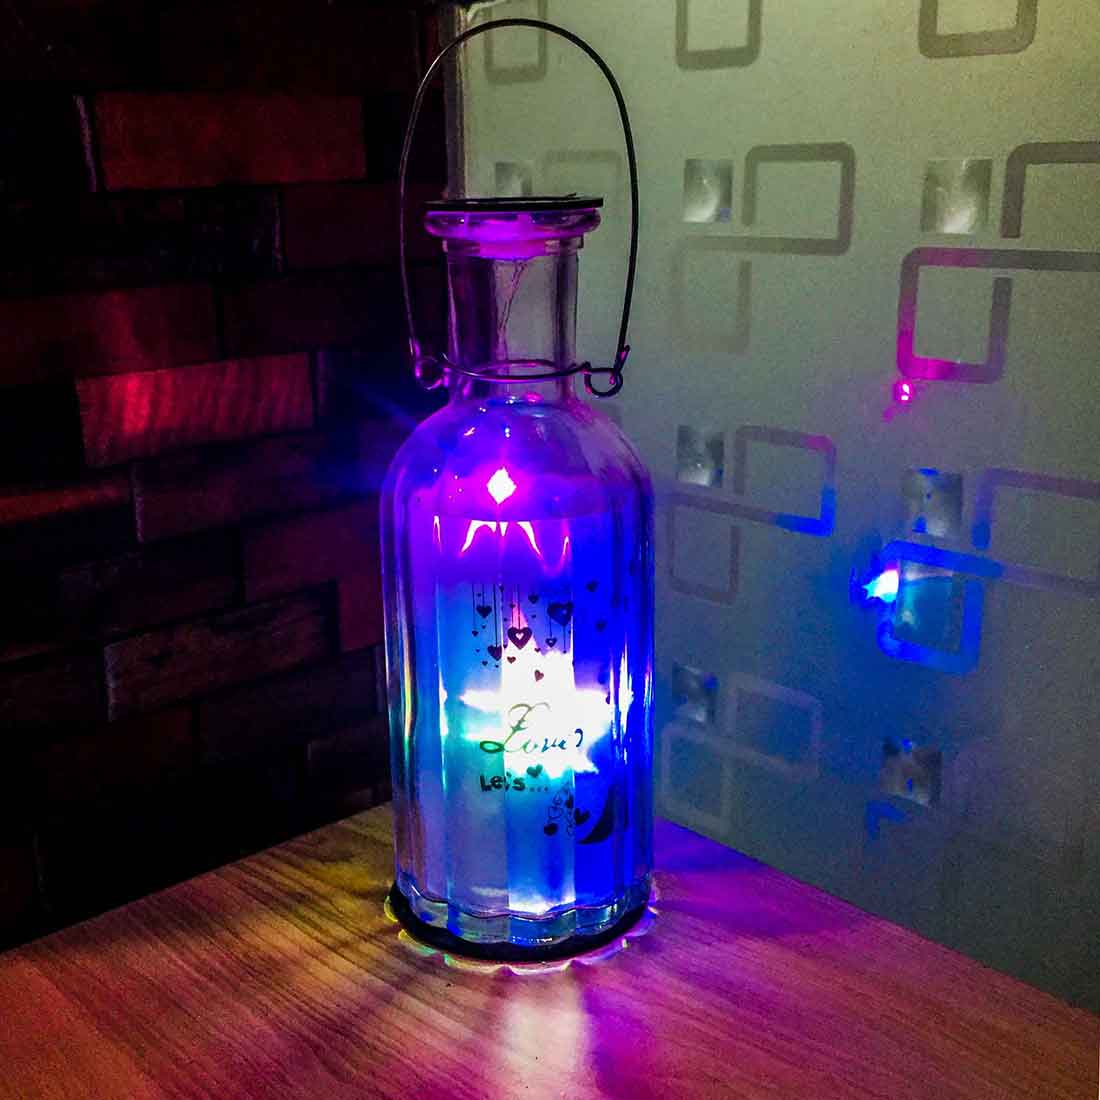 Bottler Shaped Lantern | Table Lamp - for Home Decor & Gifts - 9 Inches - ApkaMart